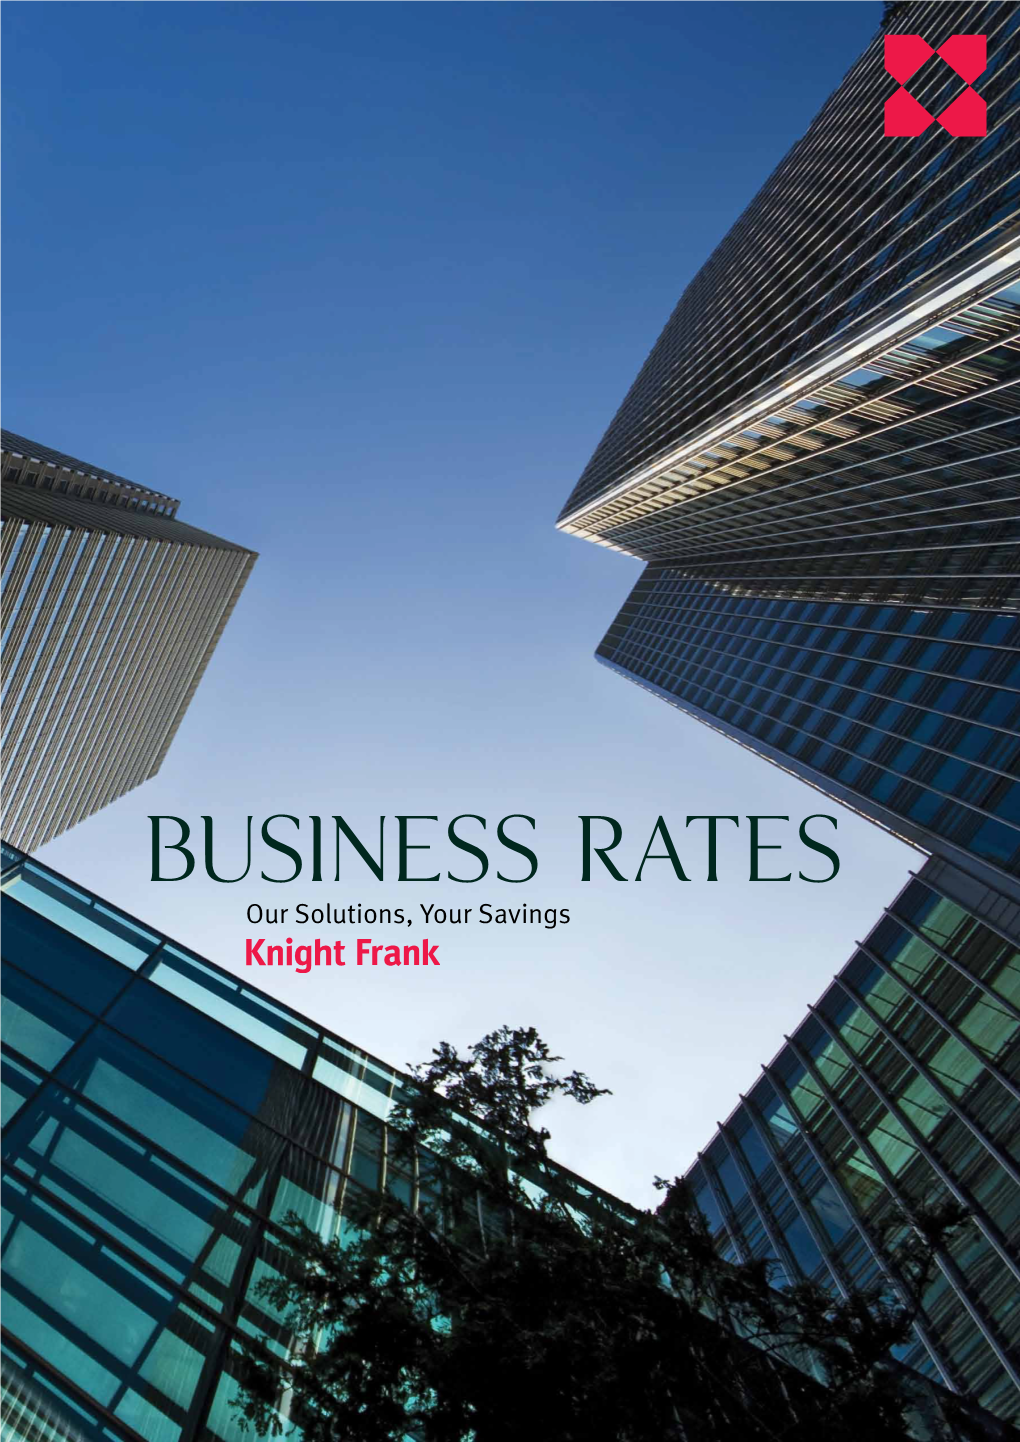 Business Rates Our Solutions, Your Savings Business Rates Typically Equate to Approximately 45% of Annual Rent